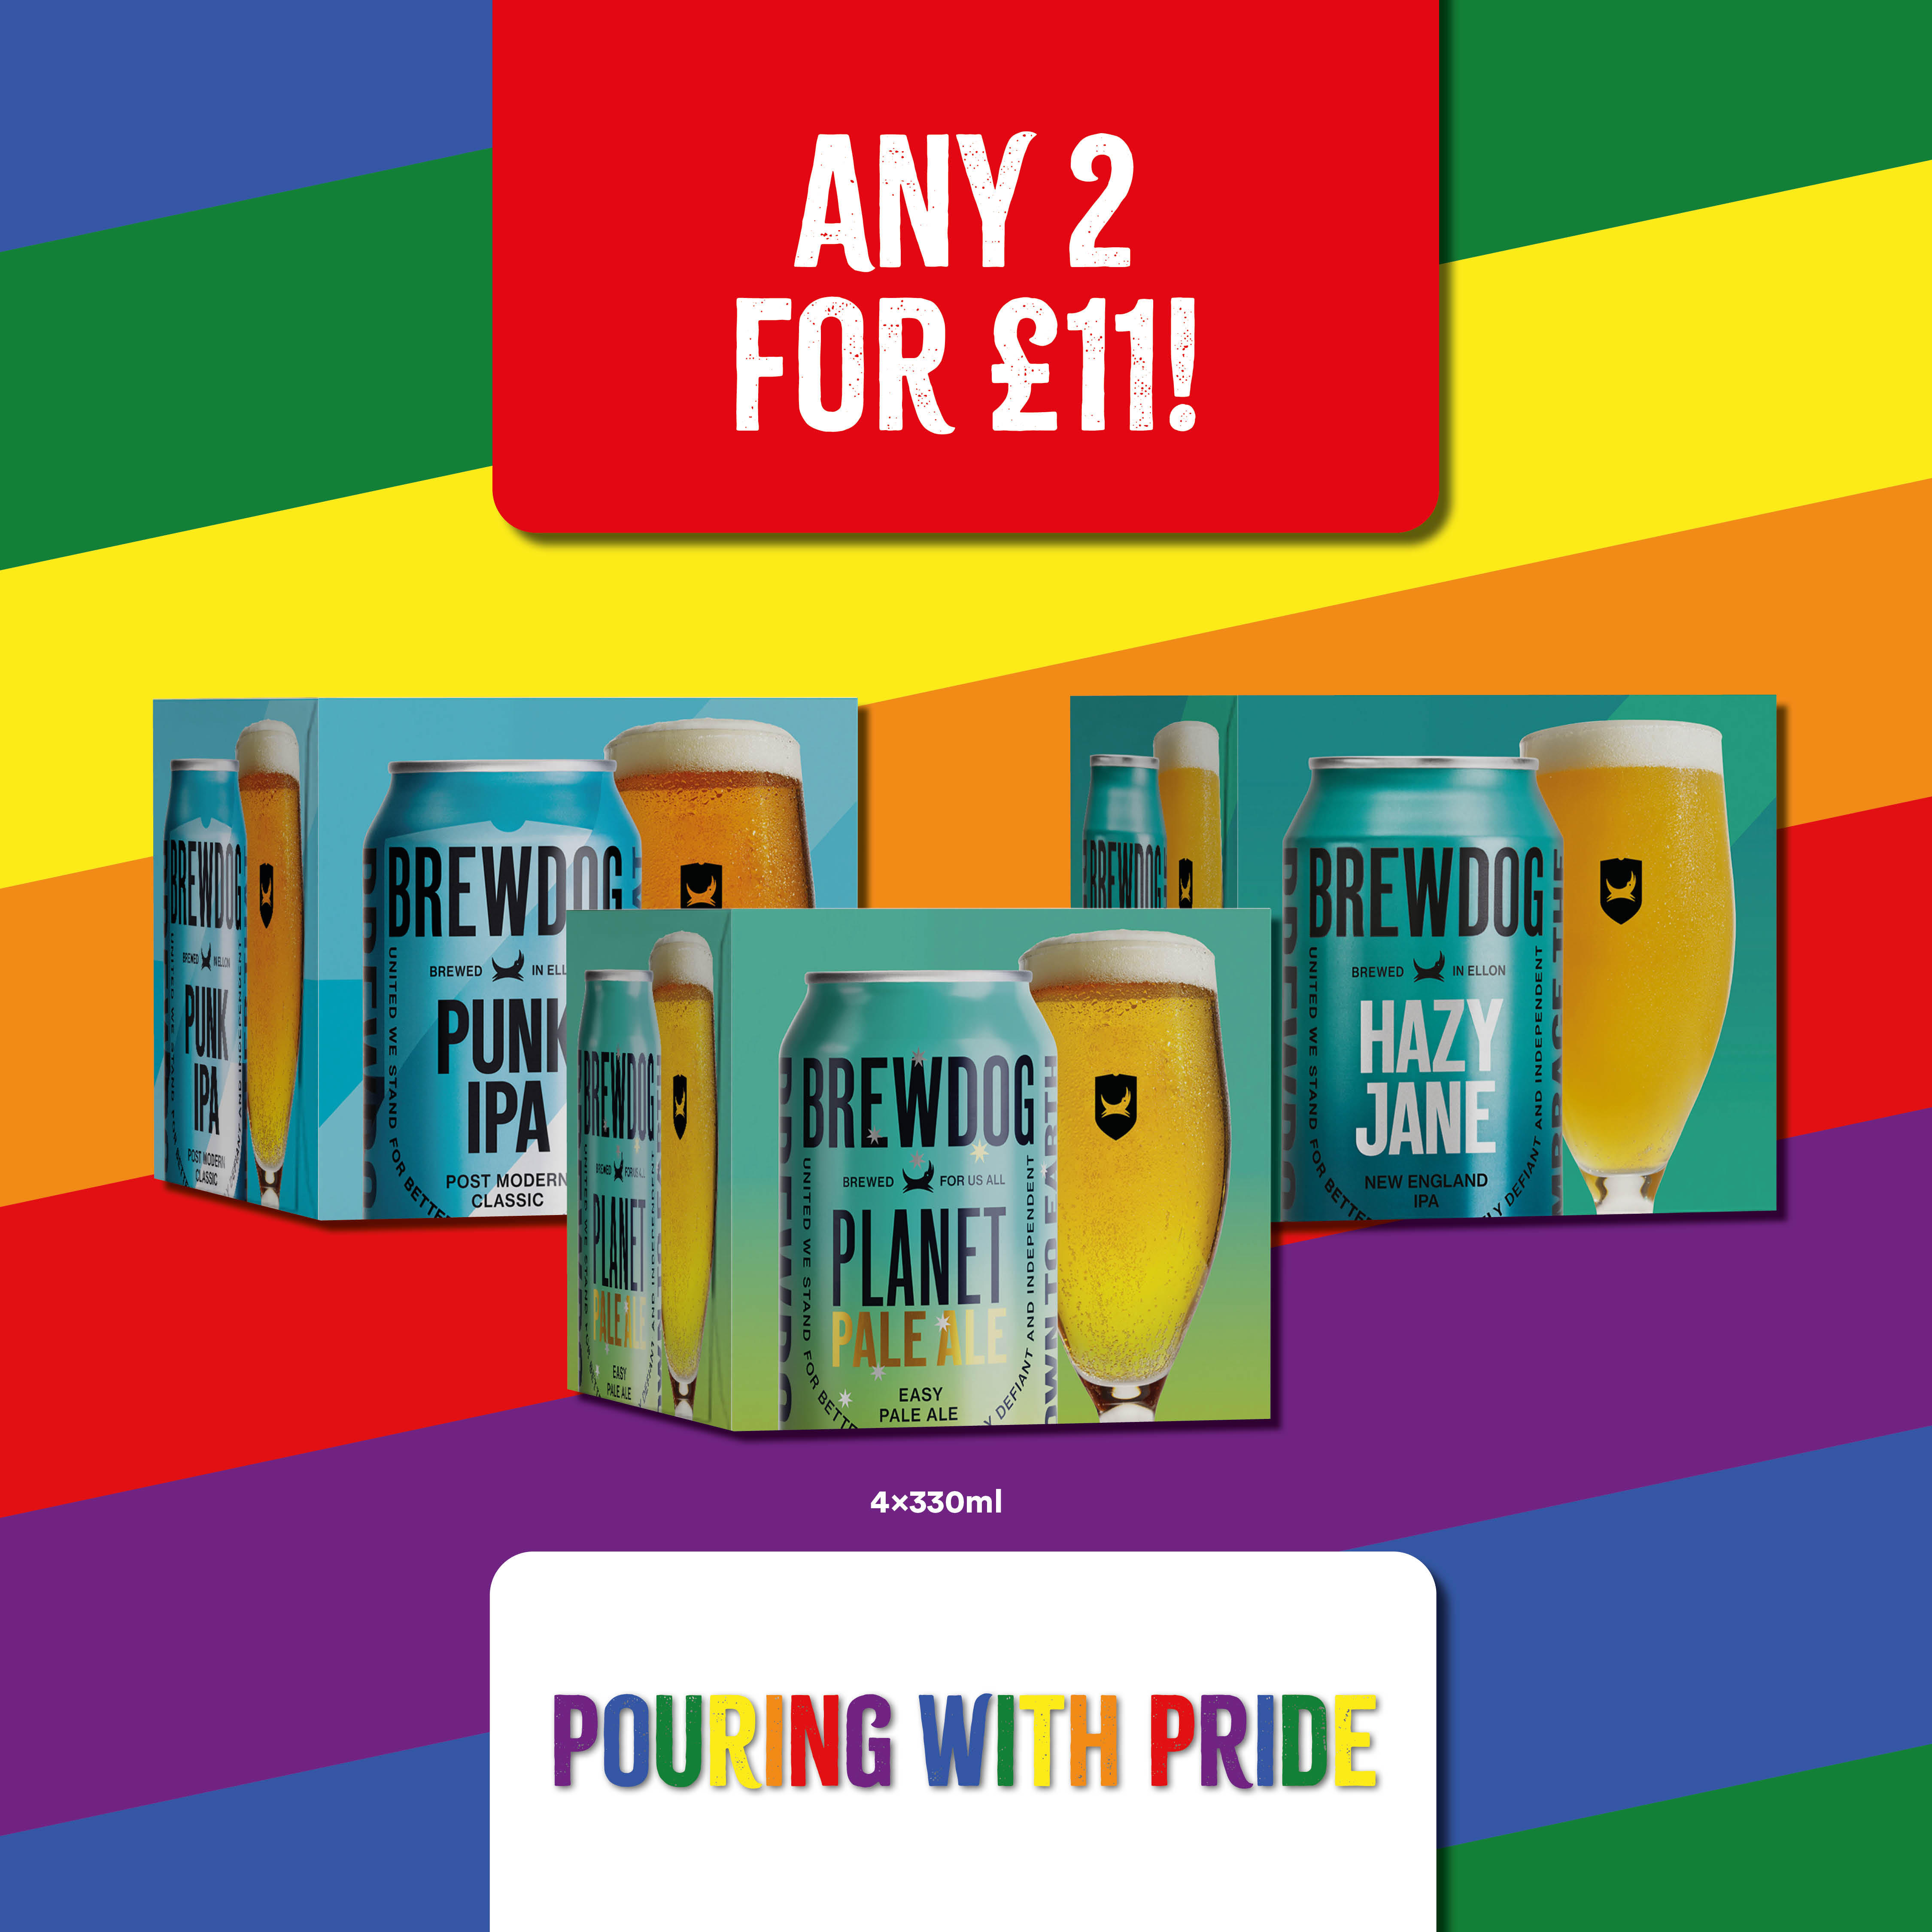 Any 2 for £11 for Brewdog Pink IPA, Planet Pale Ale and Hazy Jane 4 x 330ml. Bargain Booze Plus Horley 01293 820180